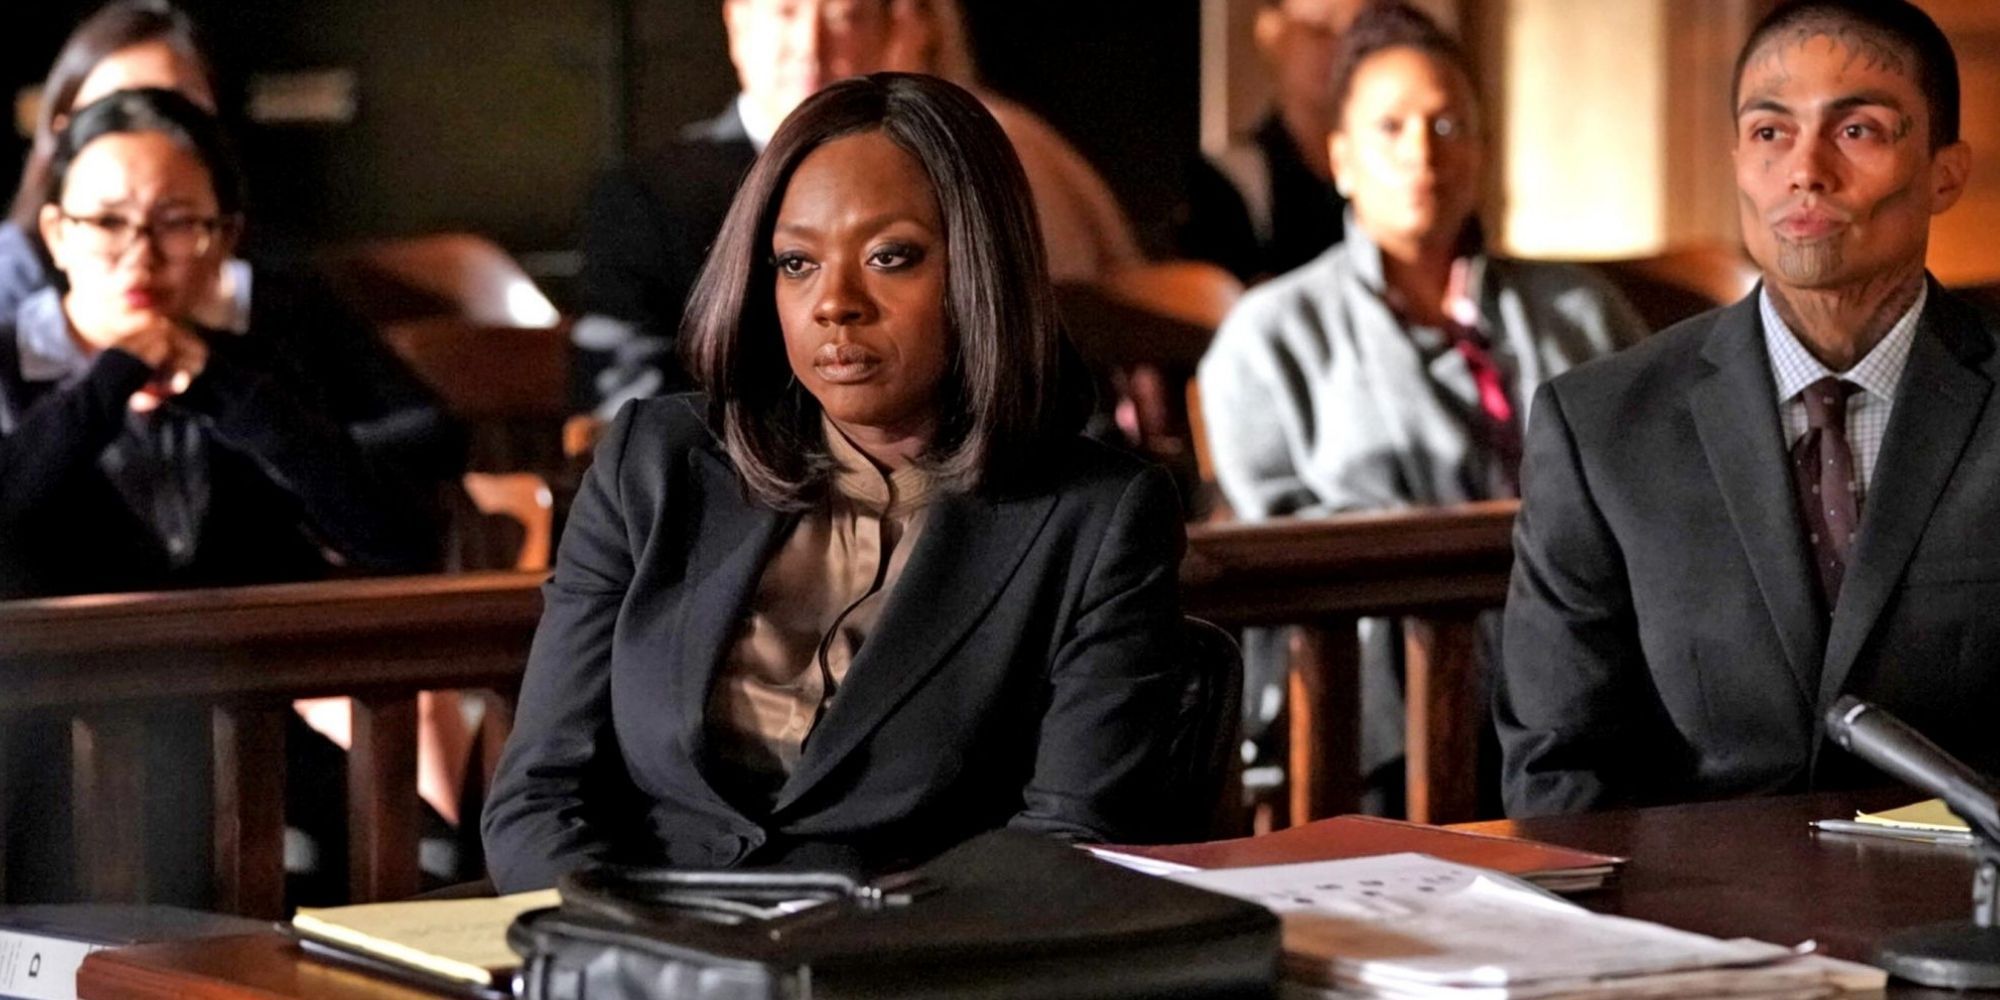 Viola Davis as Annalise Keating in How to Get Away with Murder